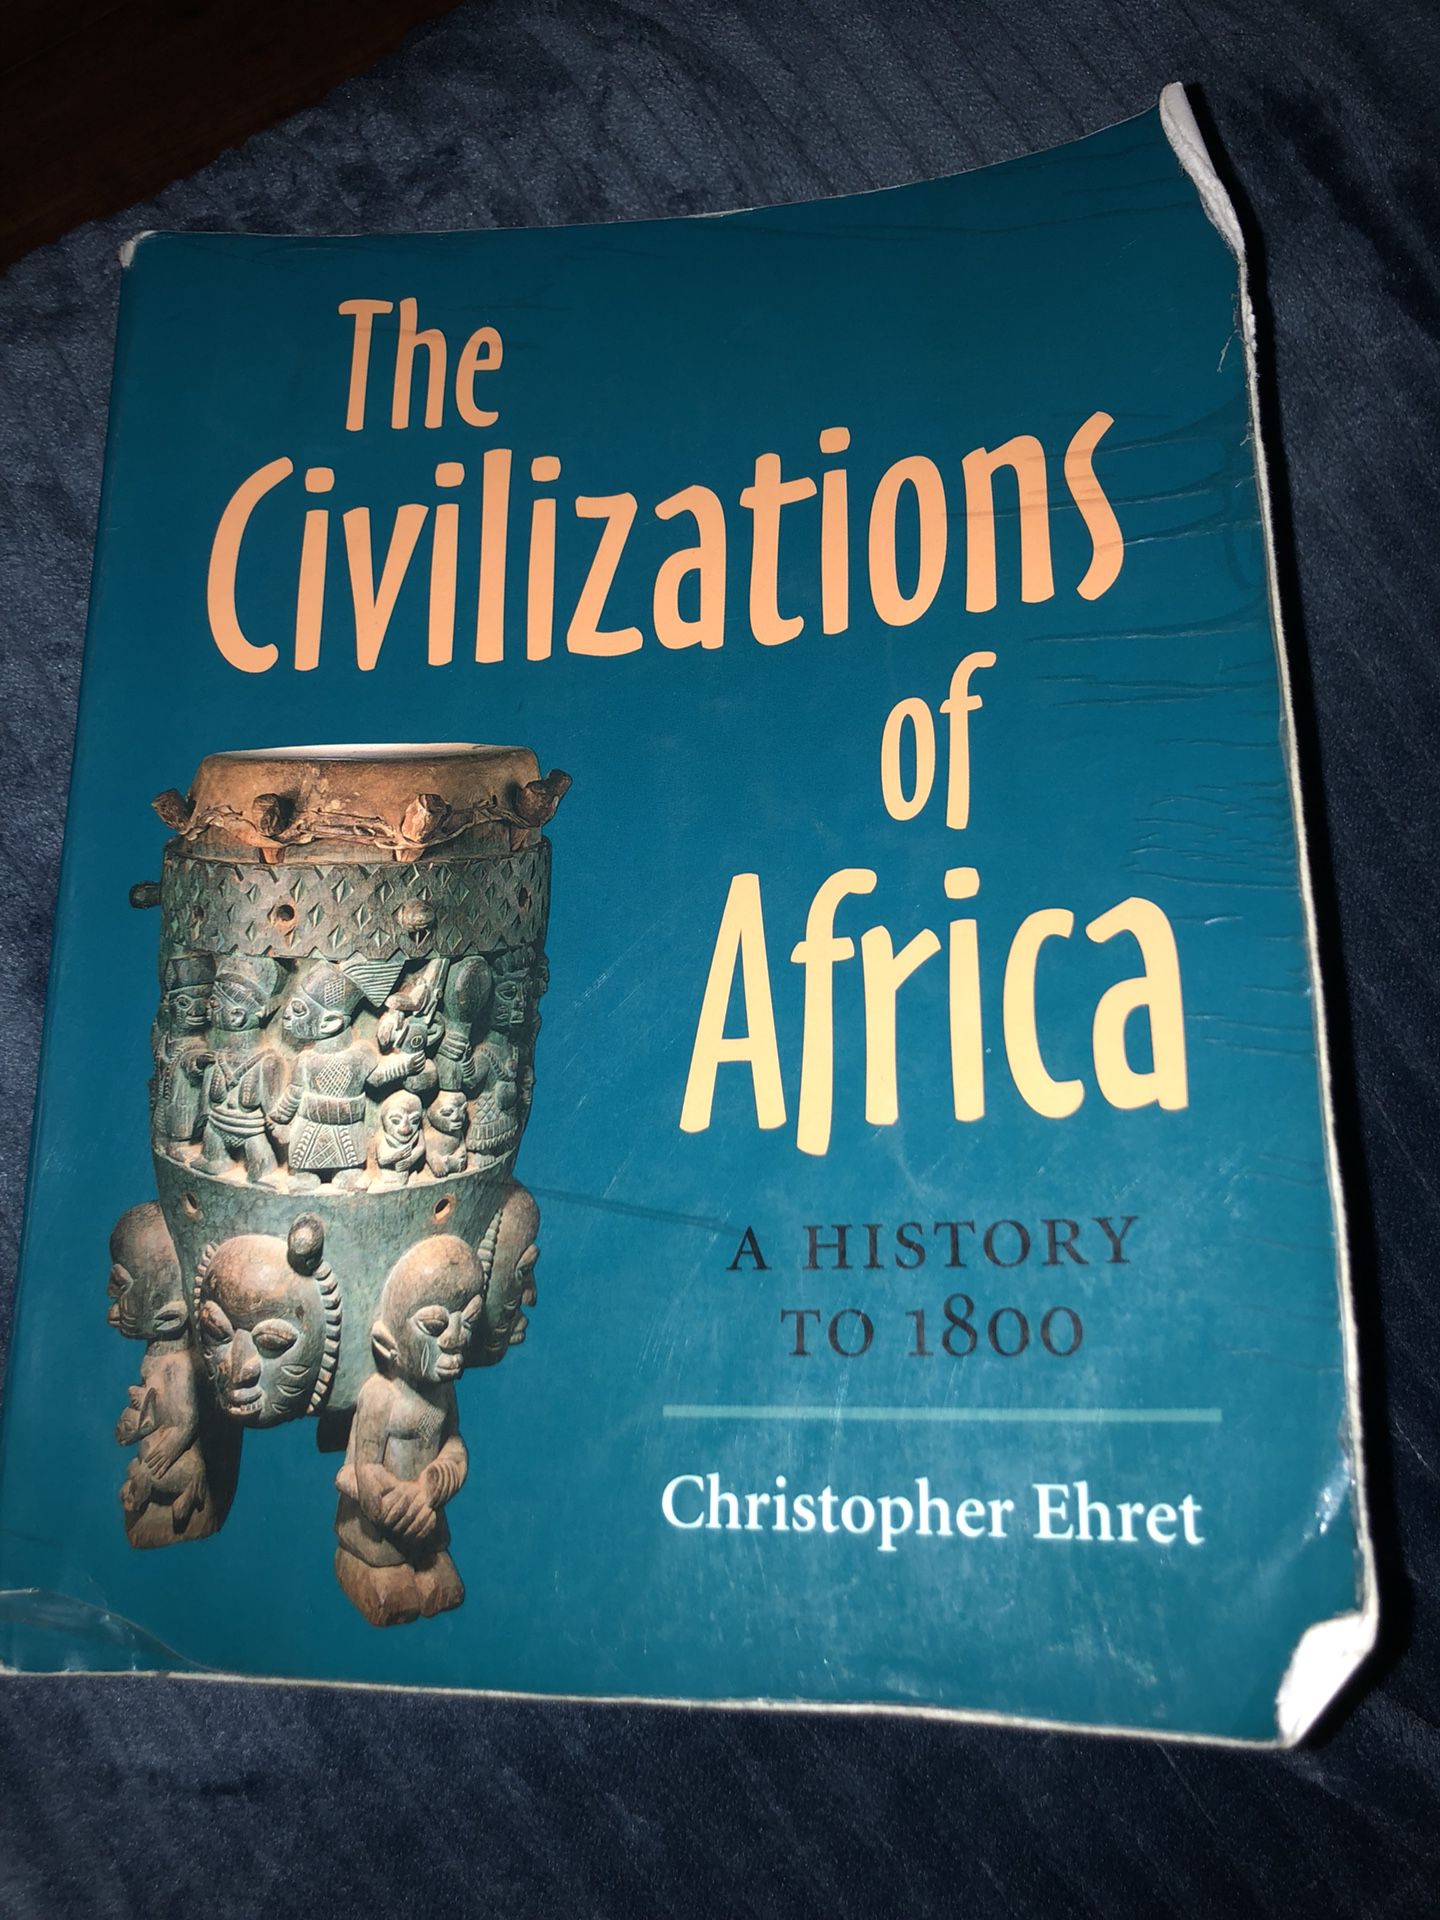 The civilization s of Africa